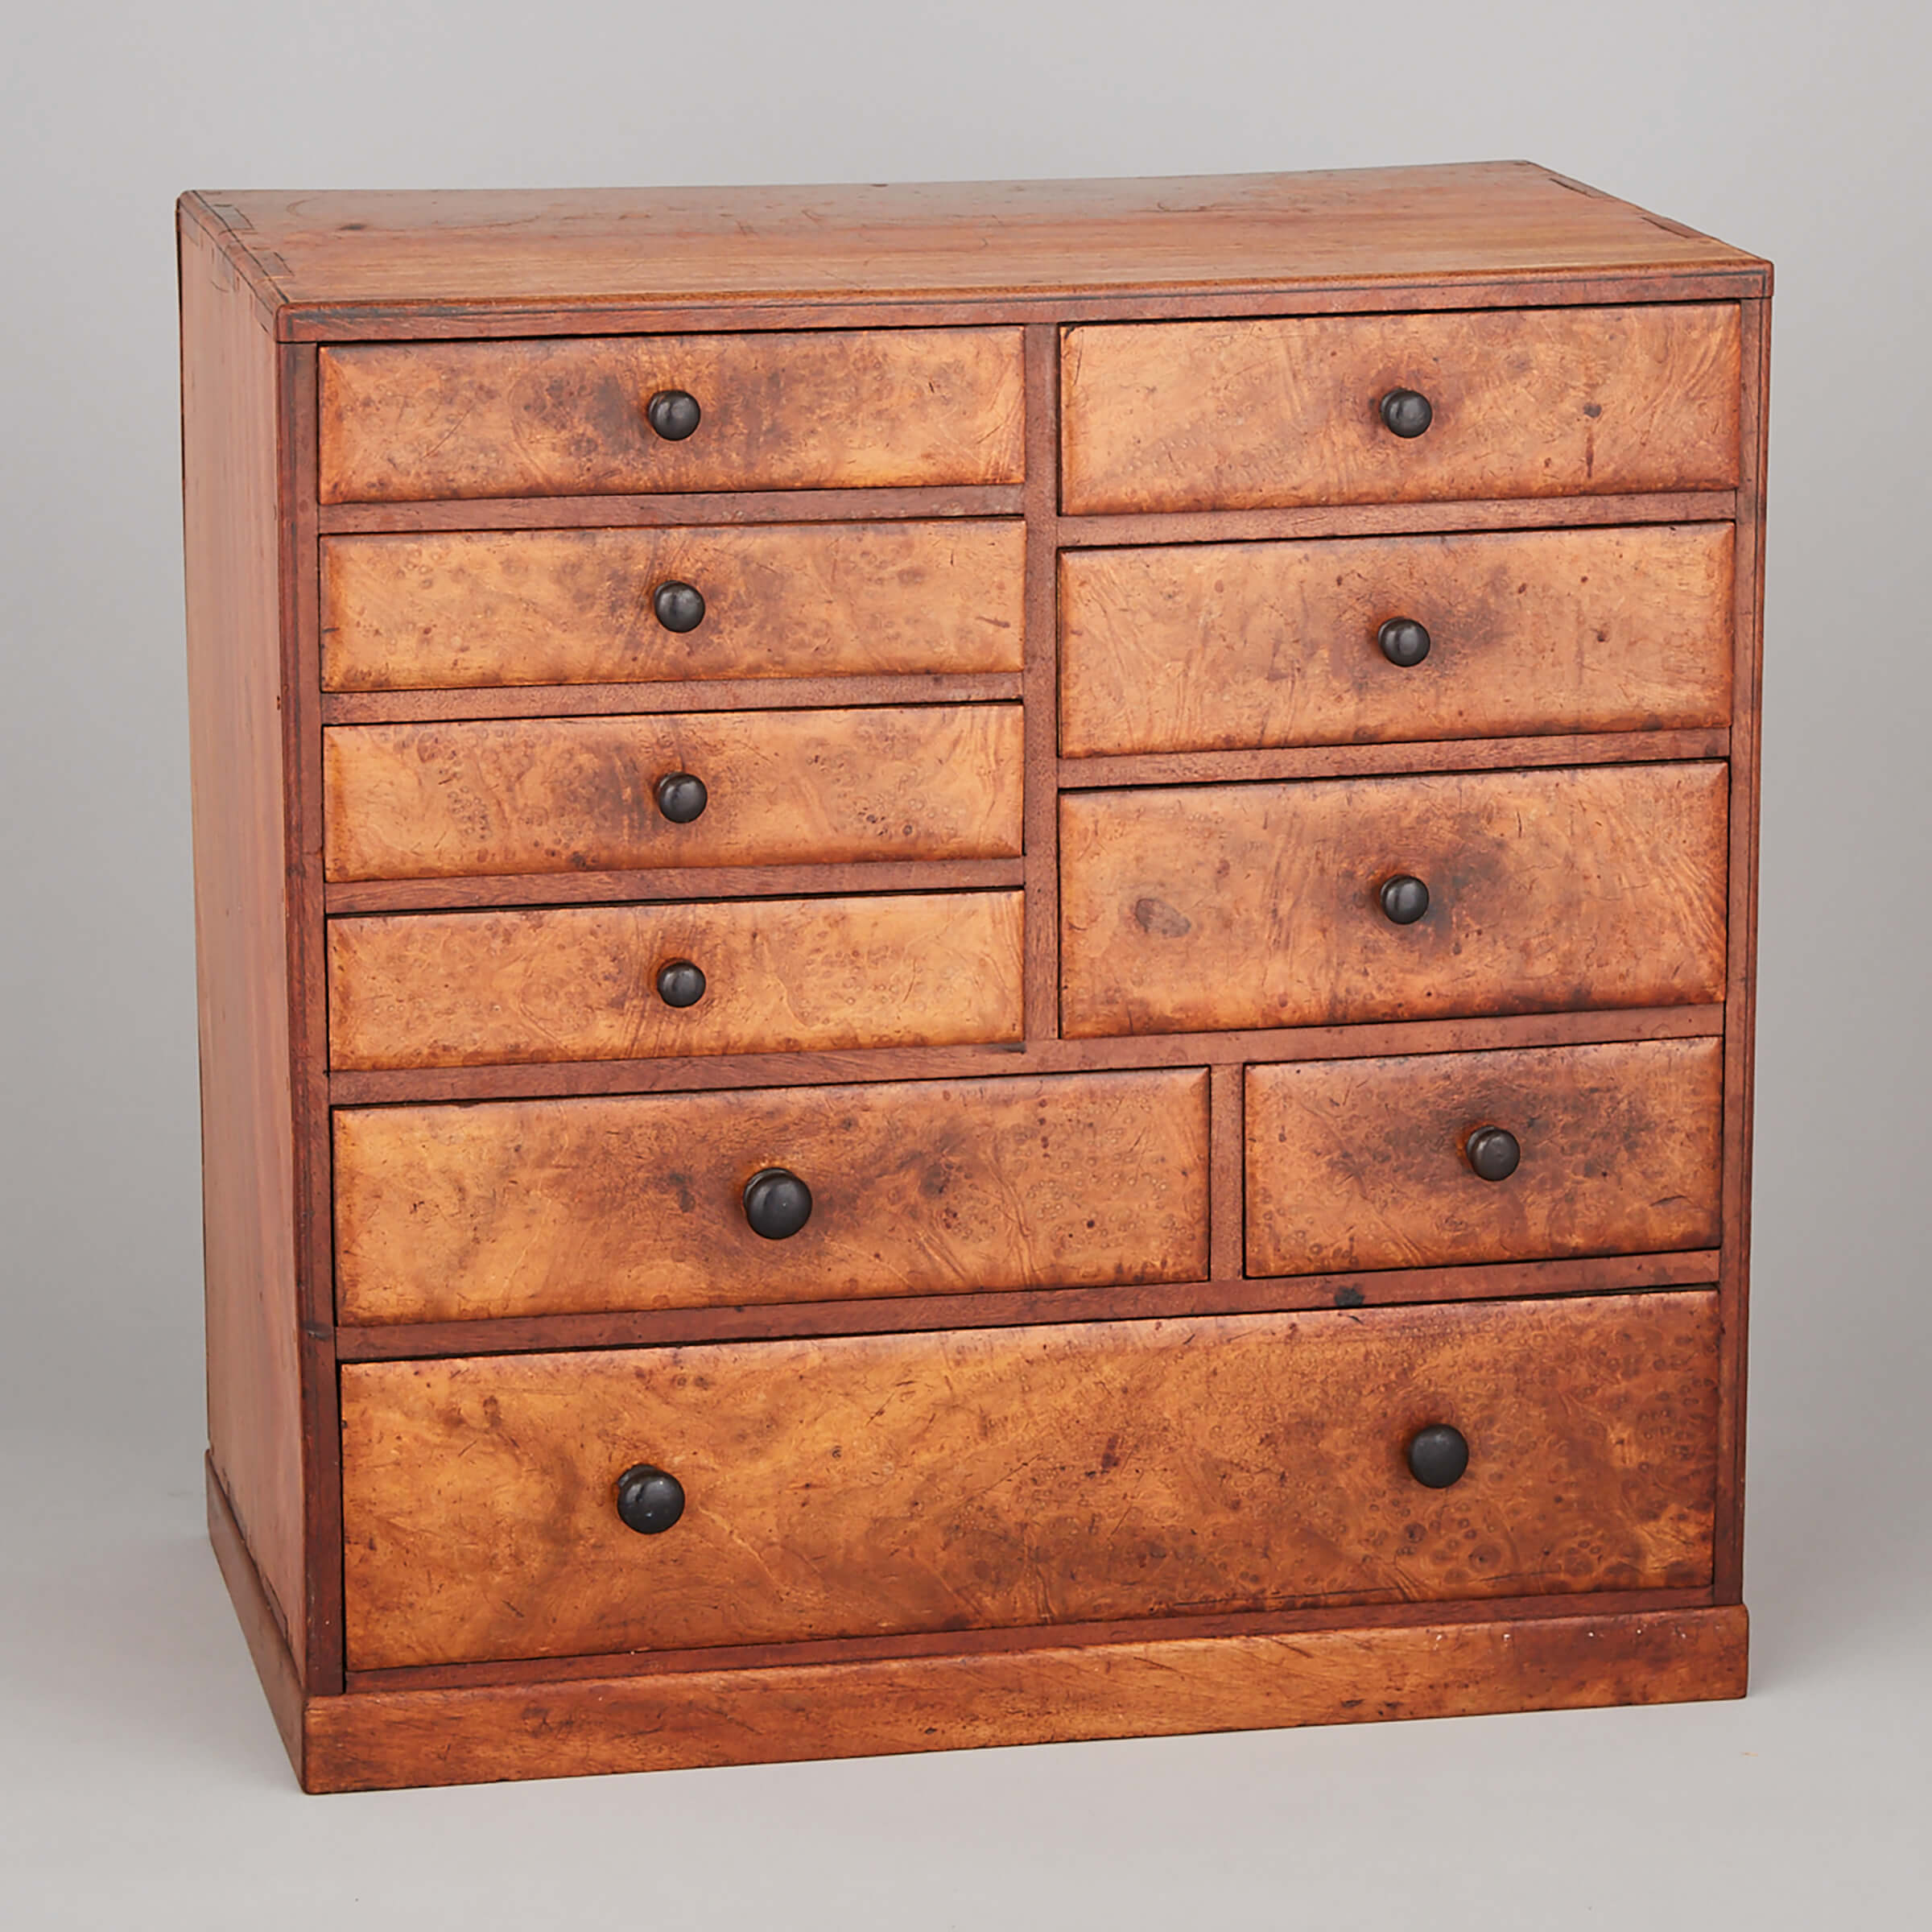 Miniature Burl Walnut Chest of Drawers, early 20th century